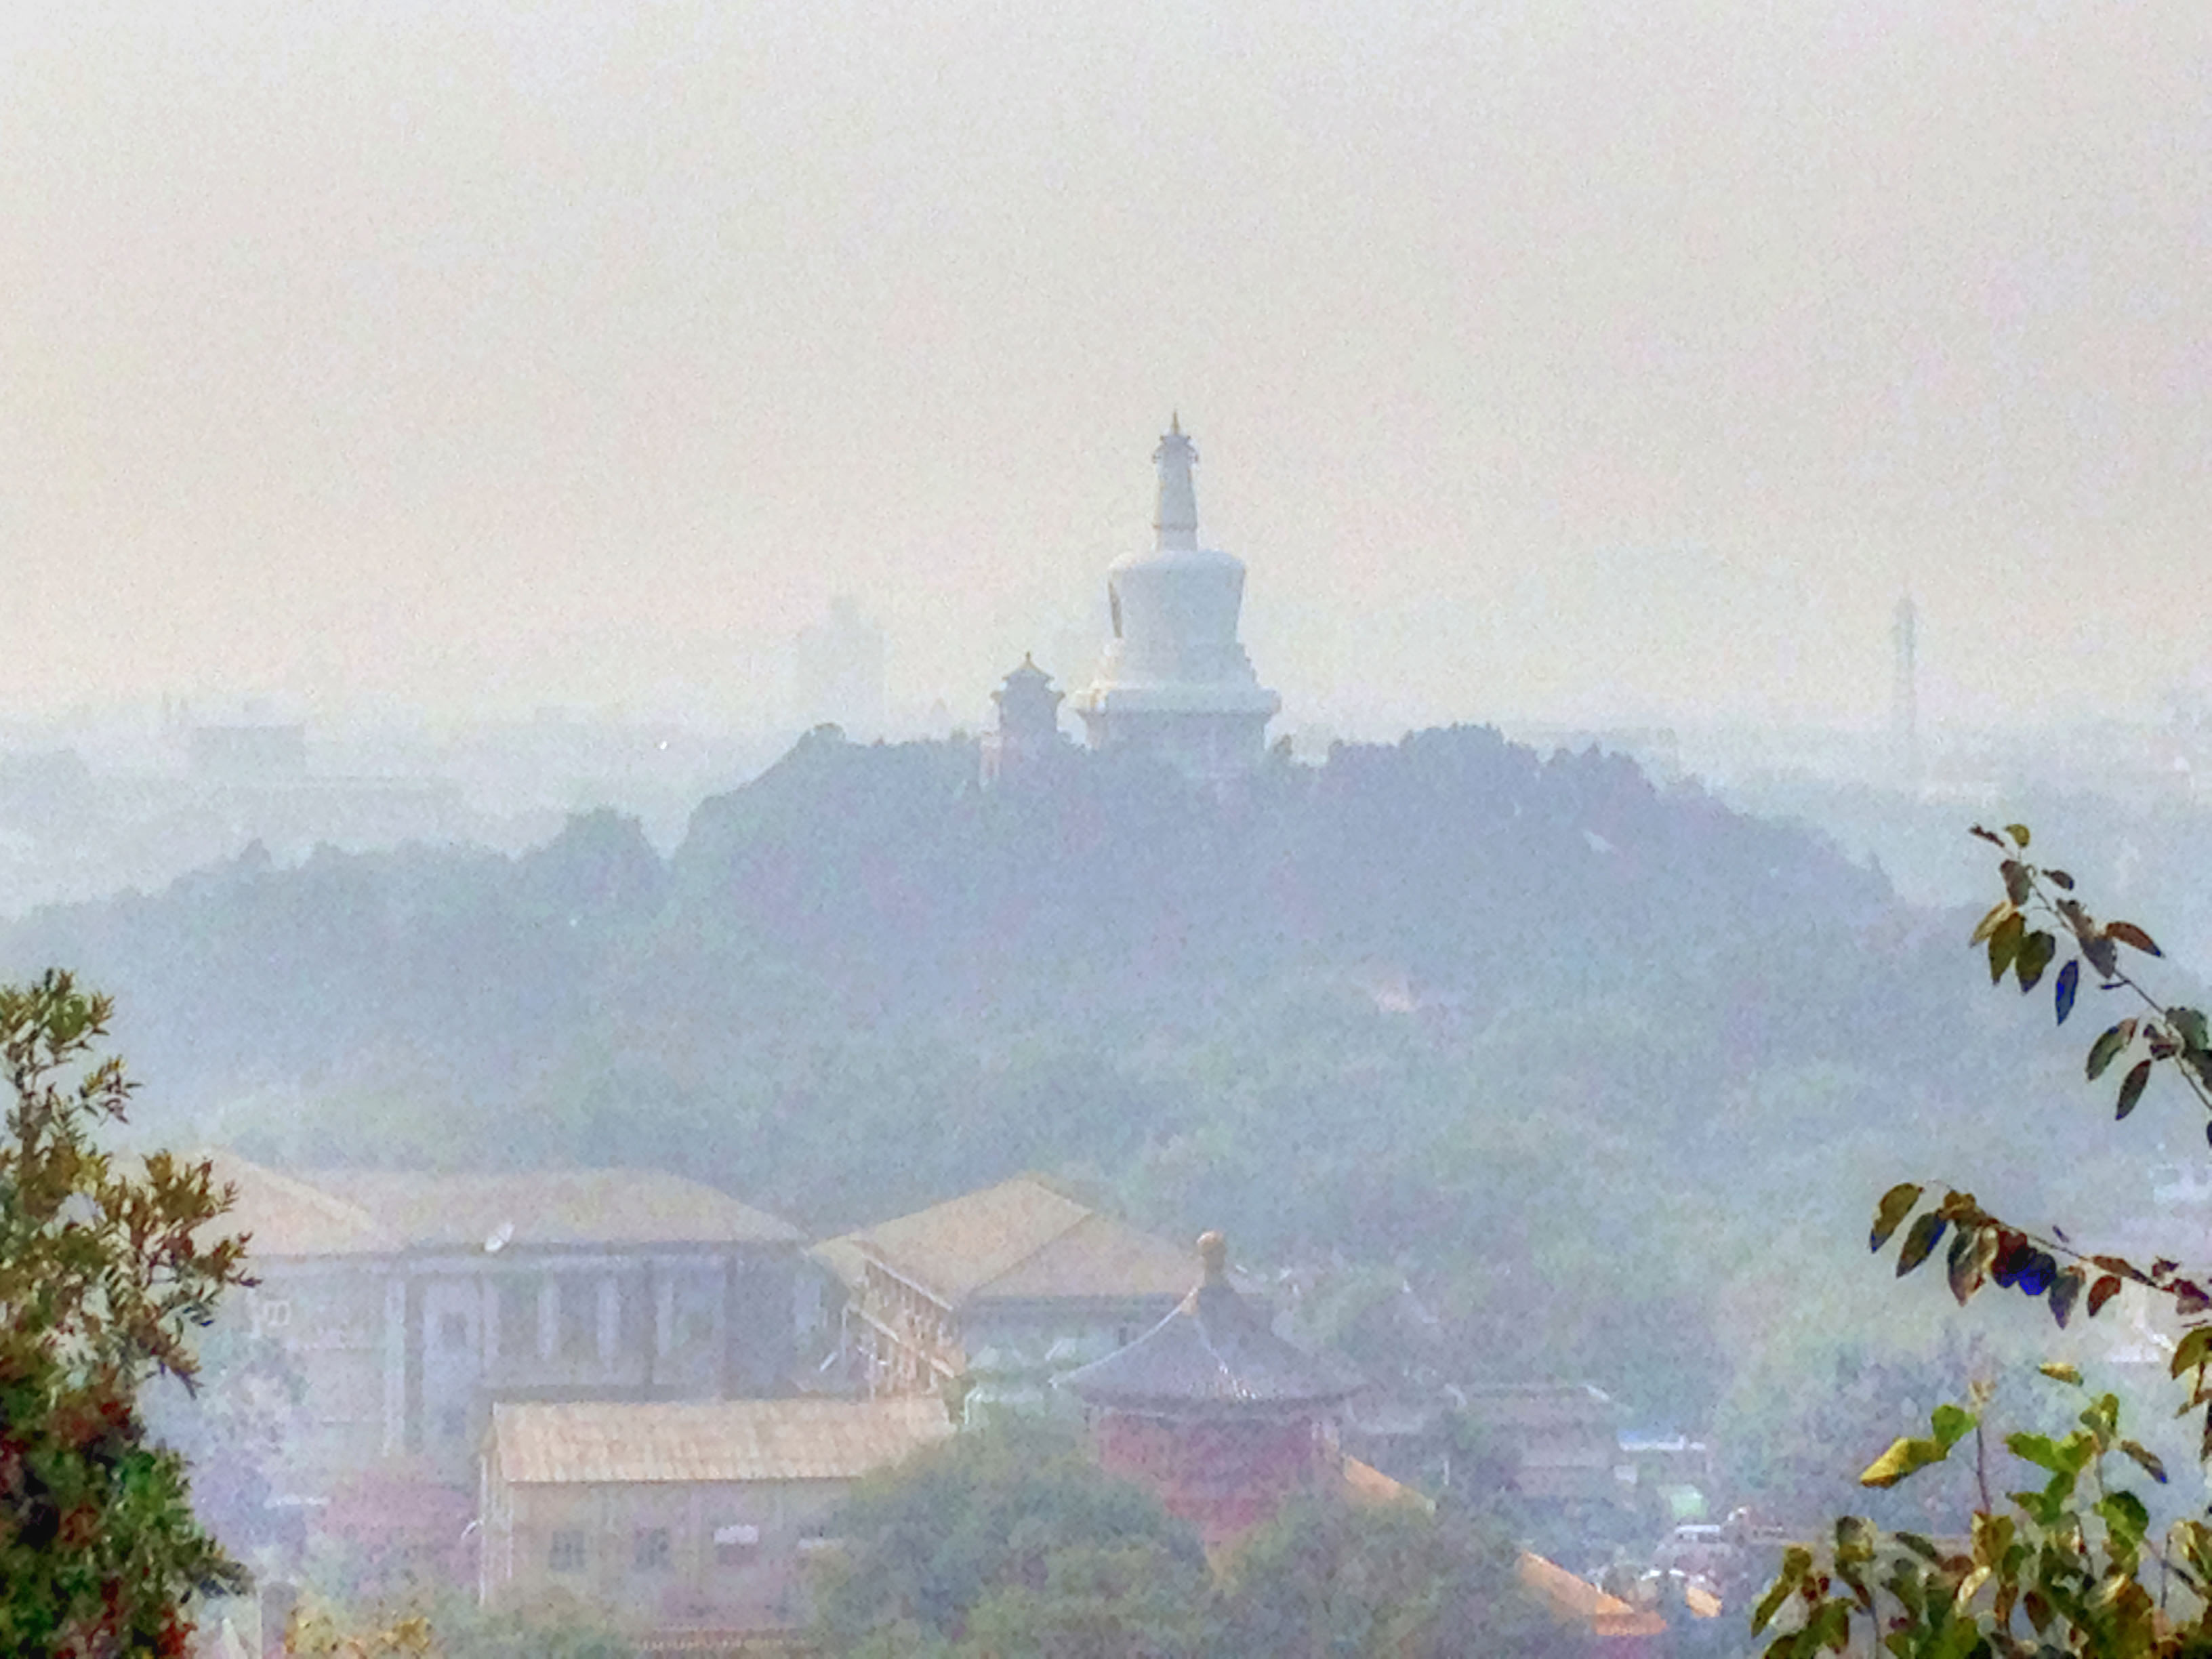 Smog obscuring the view of the white pagoda in Beijing, China. 